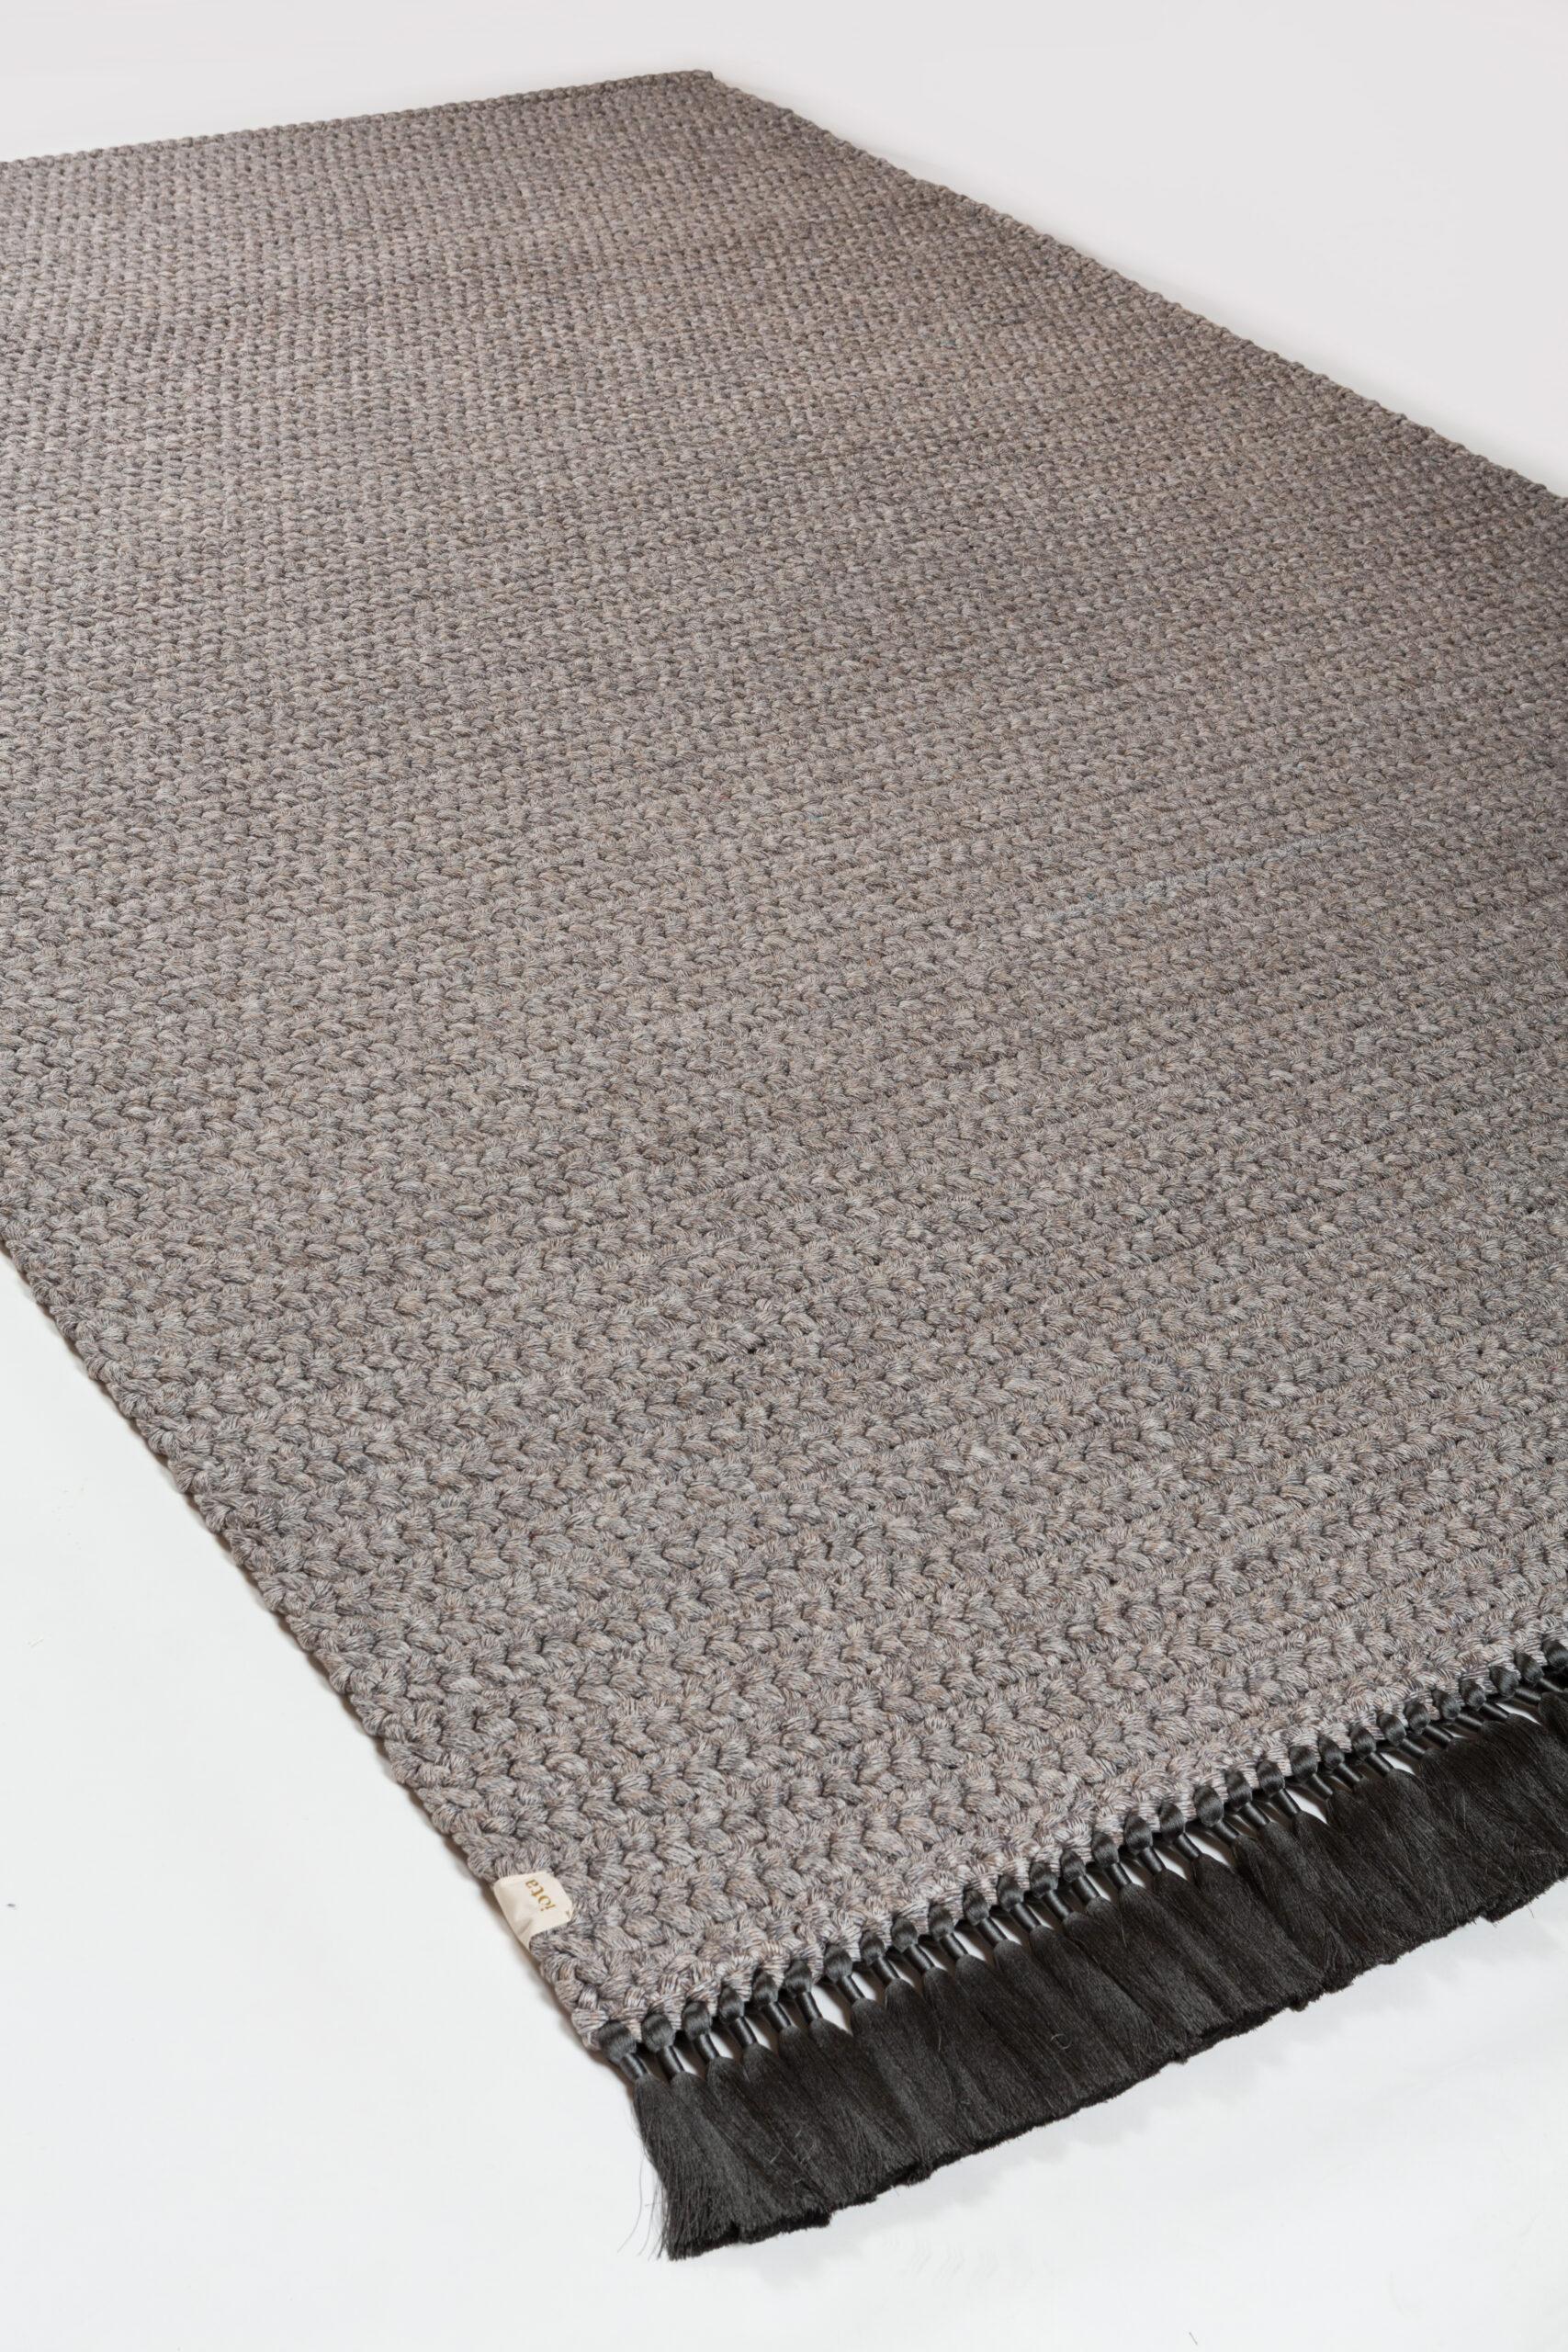 Israeli Handmade Crochet XL Thick Rug in Grey and Cacao made of Cotton & Polyester For Sale